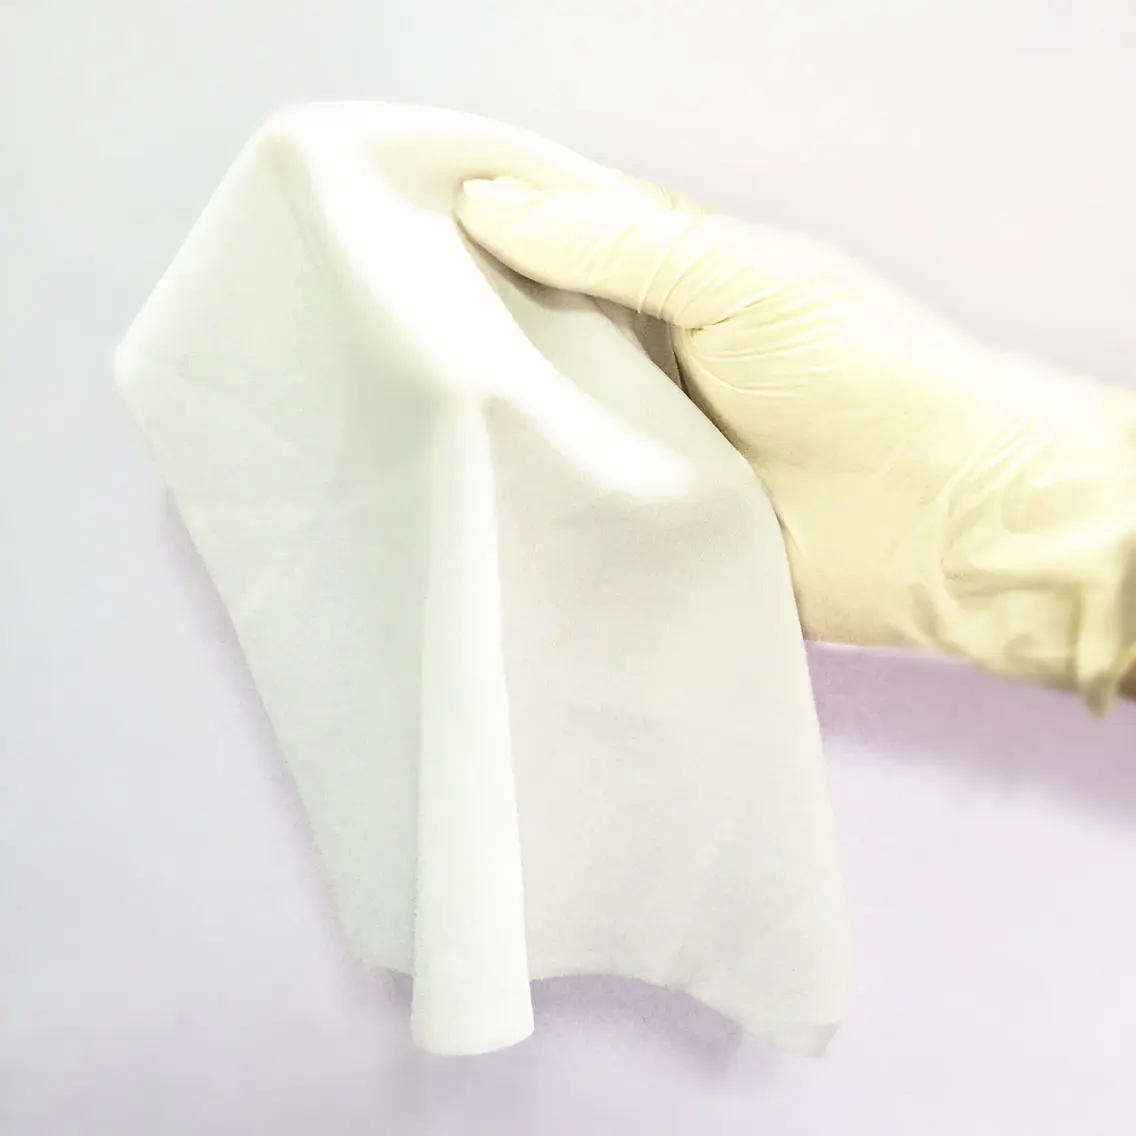 portable Polyester wipe for Industrial thermally sealed factory direct for medical device products